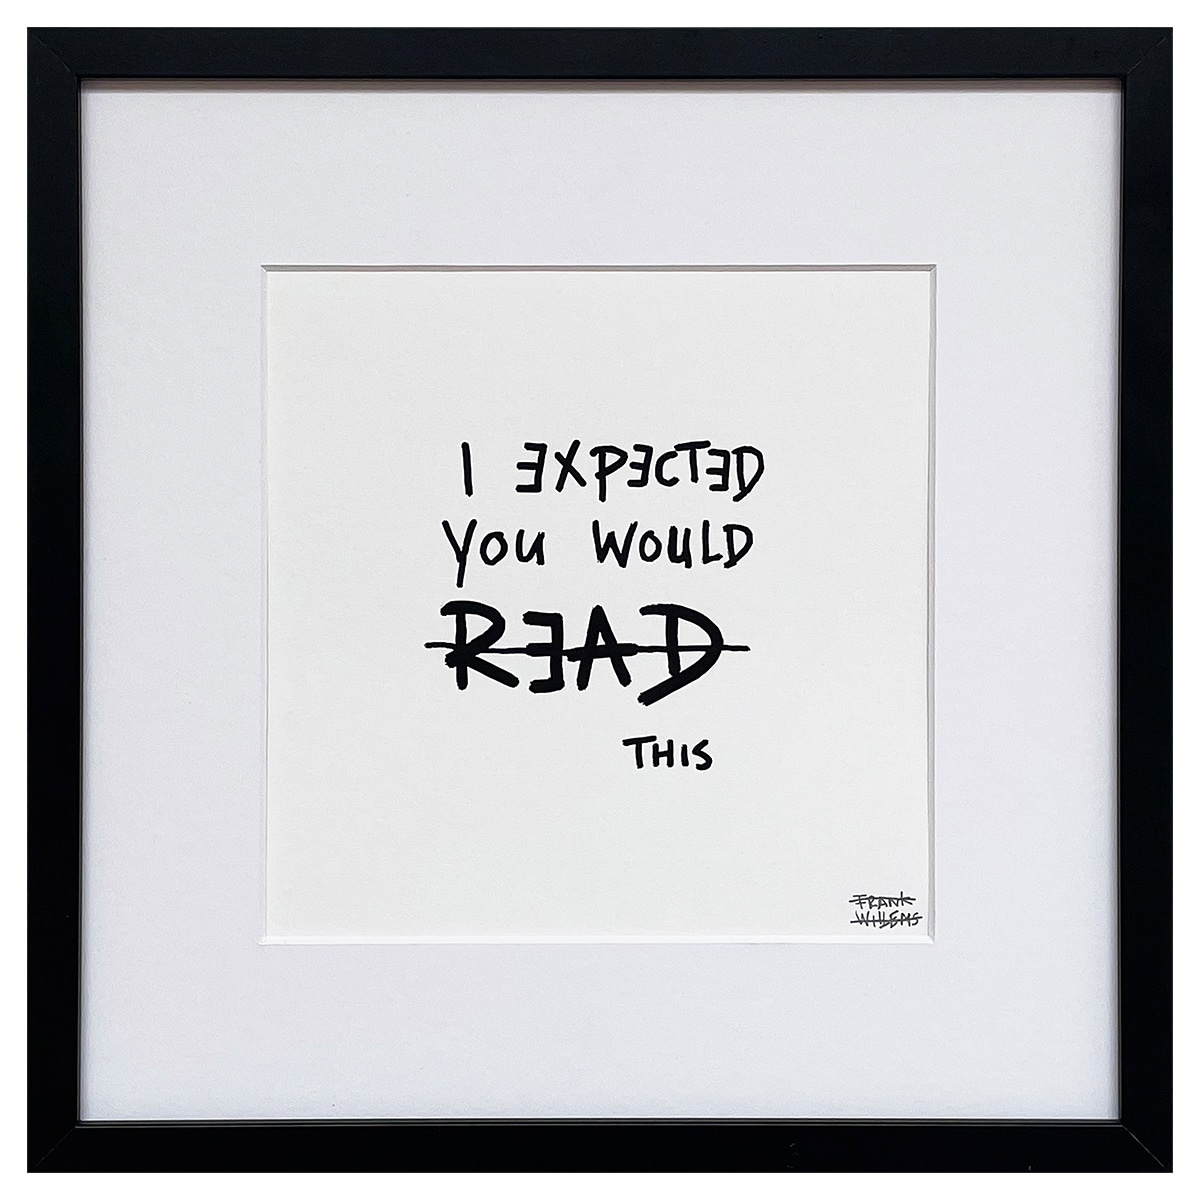 Limited Edt. Text Print – I EXPECTED YOU WOULD READ THIS